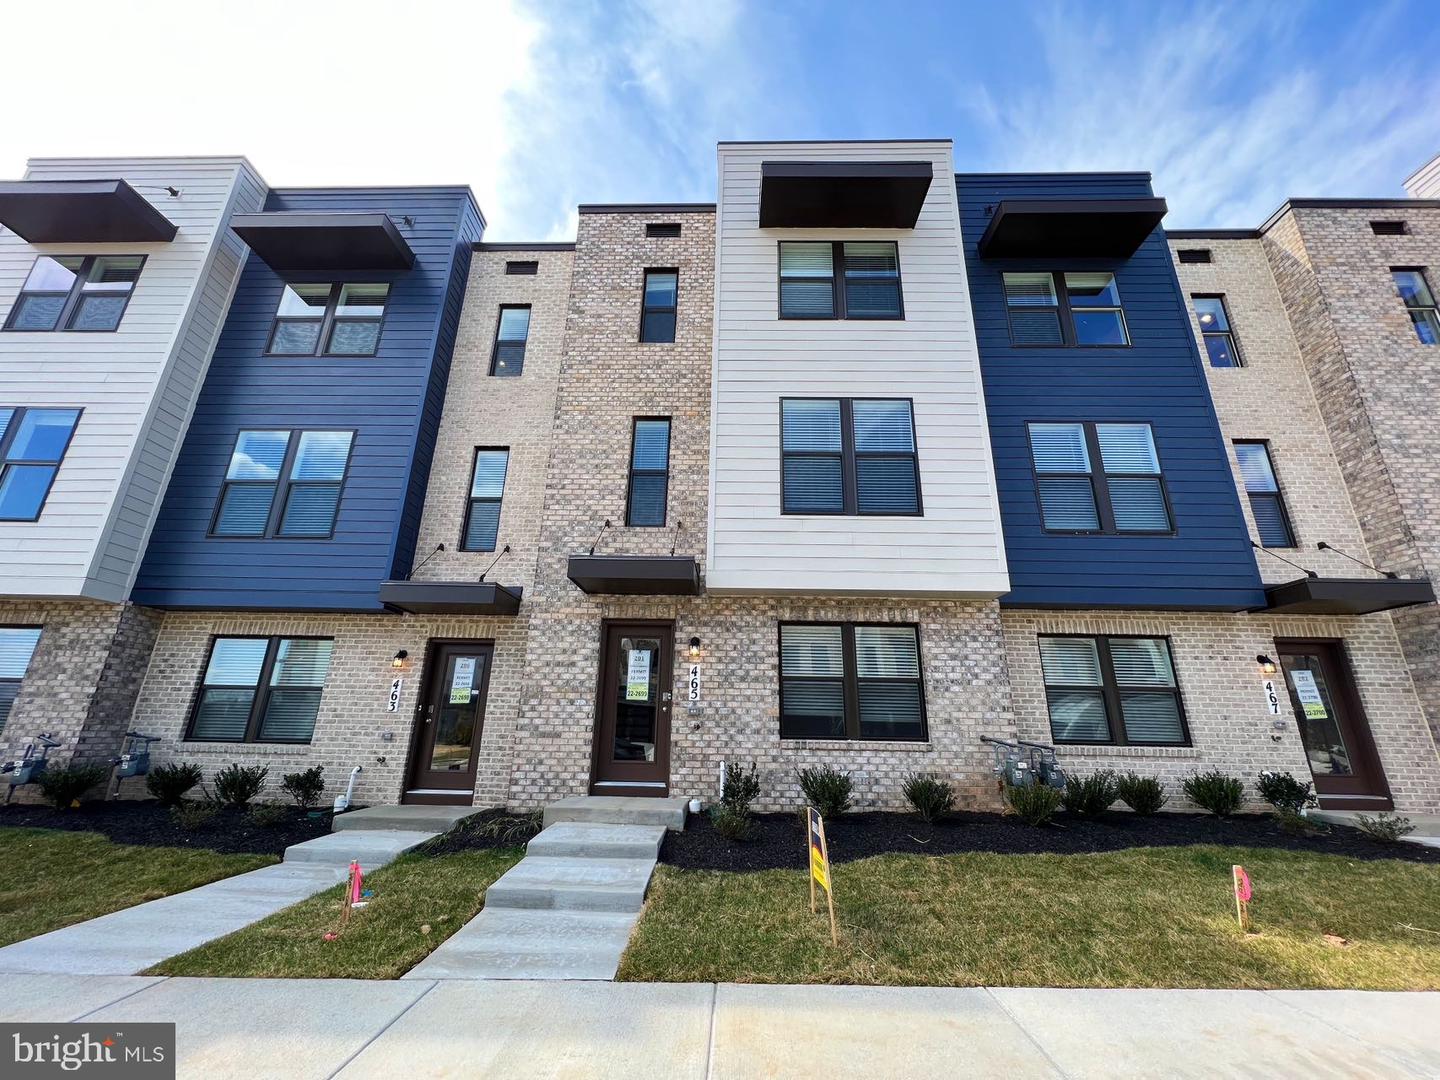 View Frederick, MD 21701 townhome